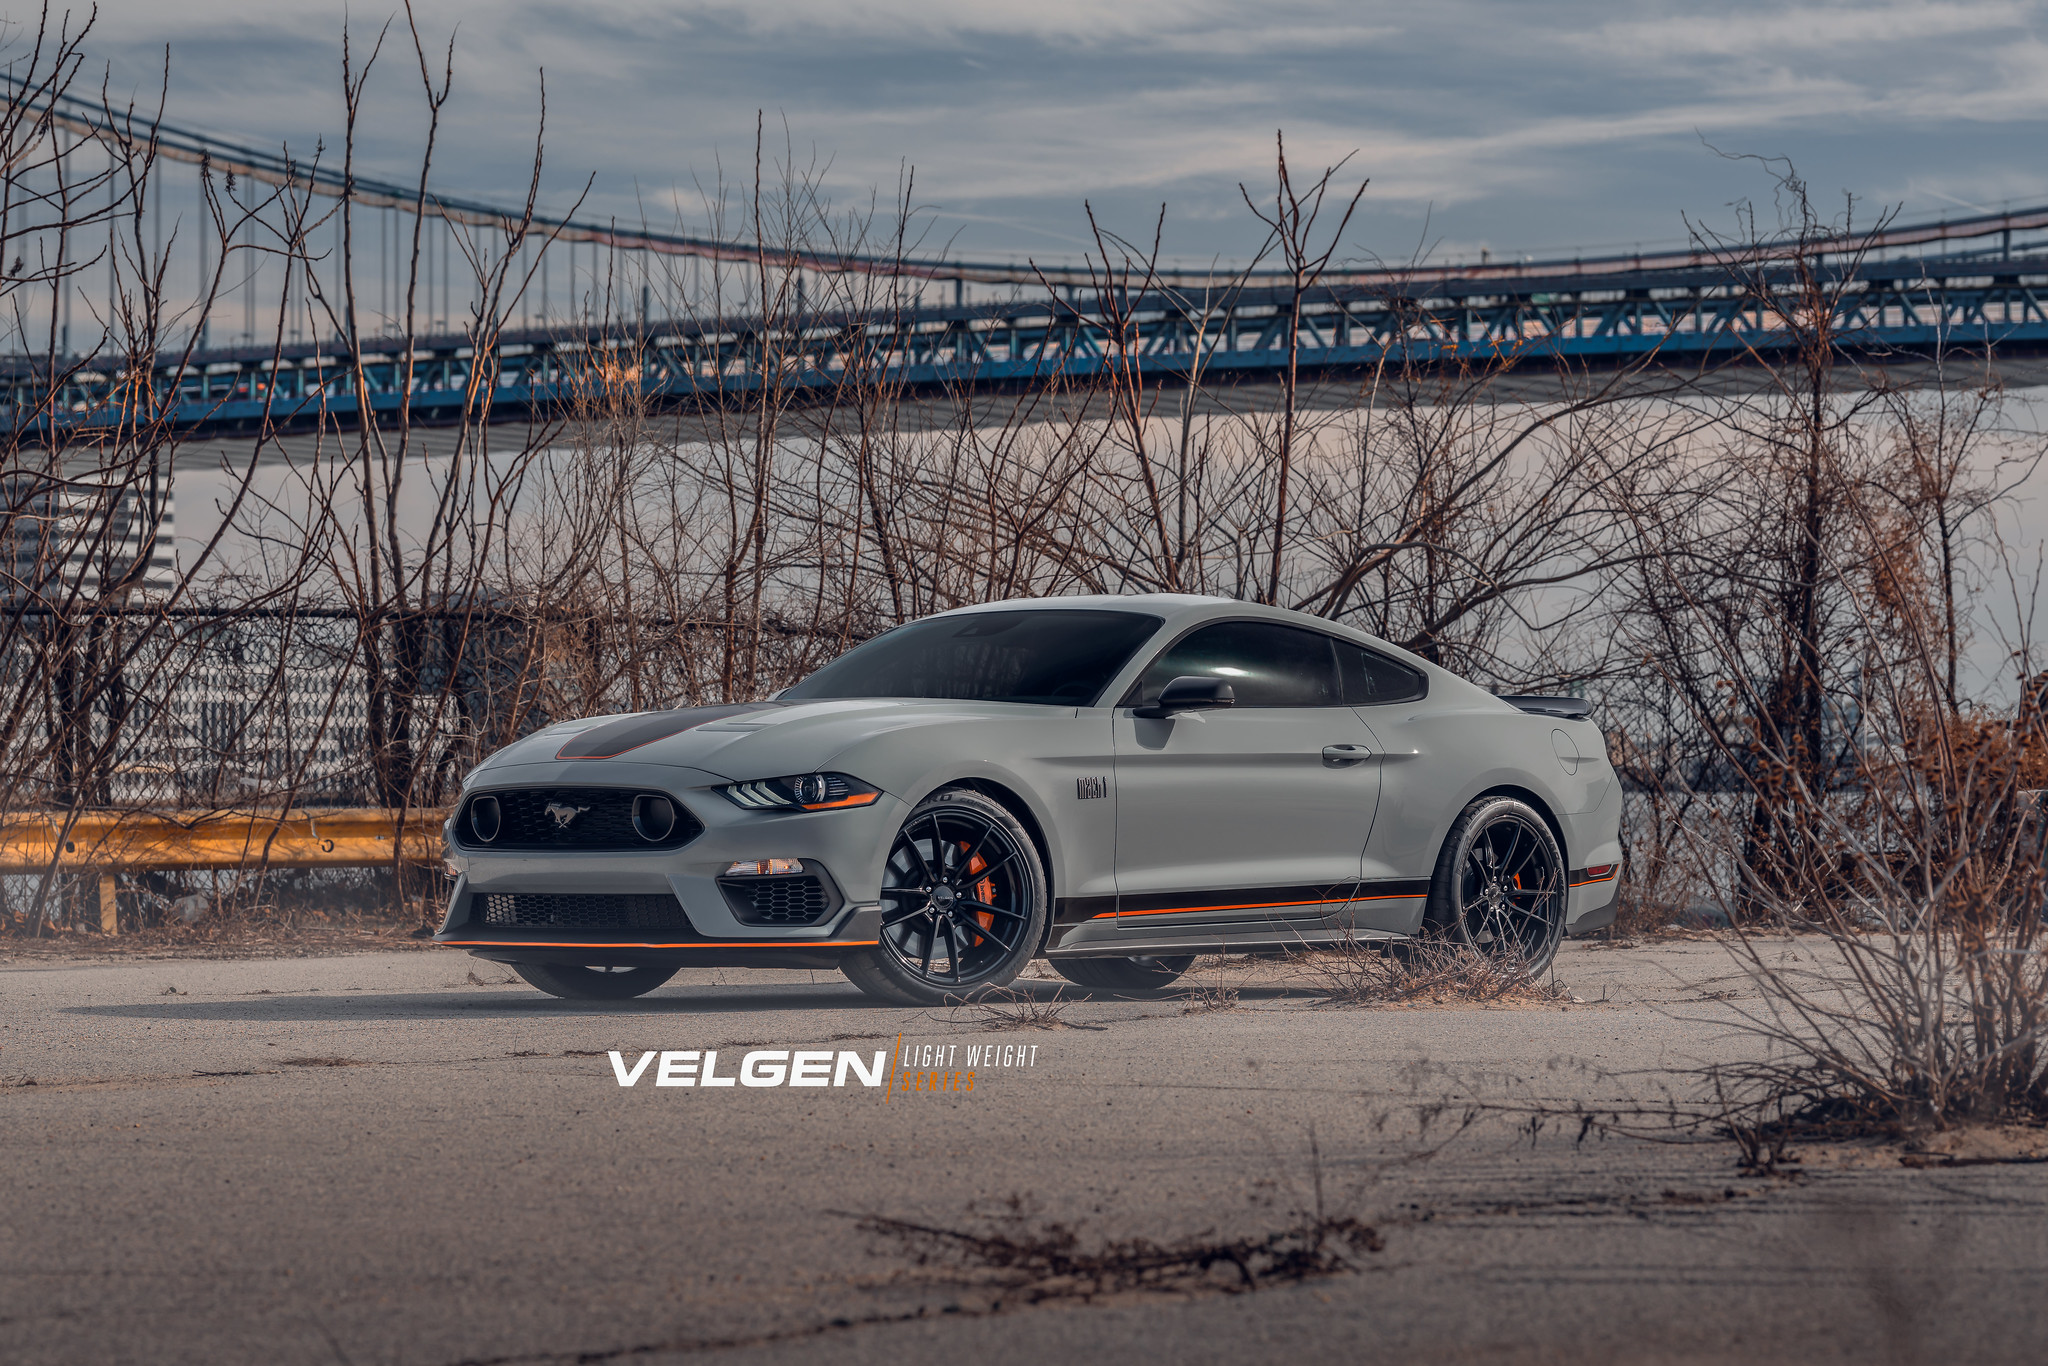 S650 Mustang 19" 20" Velgen Flow Forged Concave Wheels Mustang S650 - Vibe Motorsports Official Thread 51037666127_ccc6b4d679_k